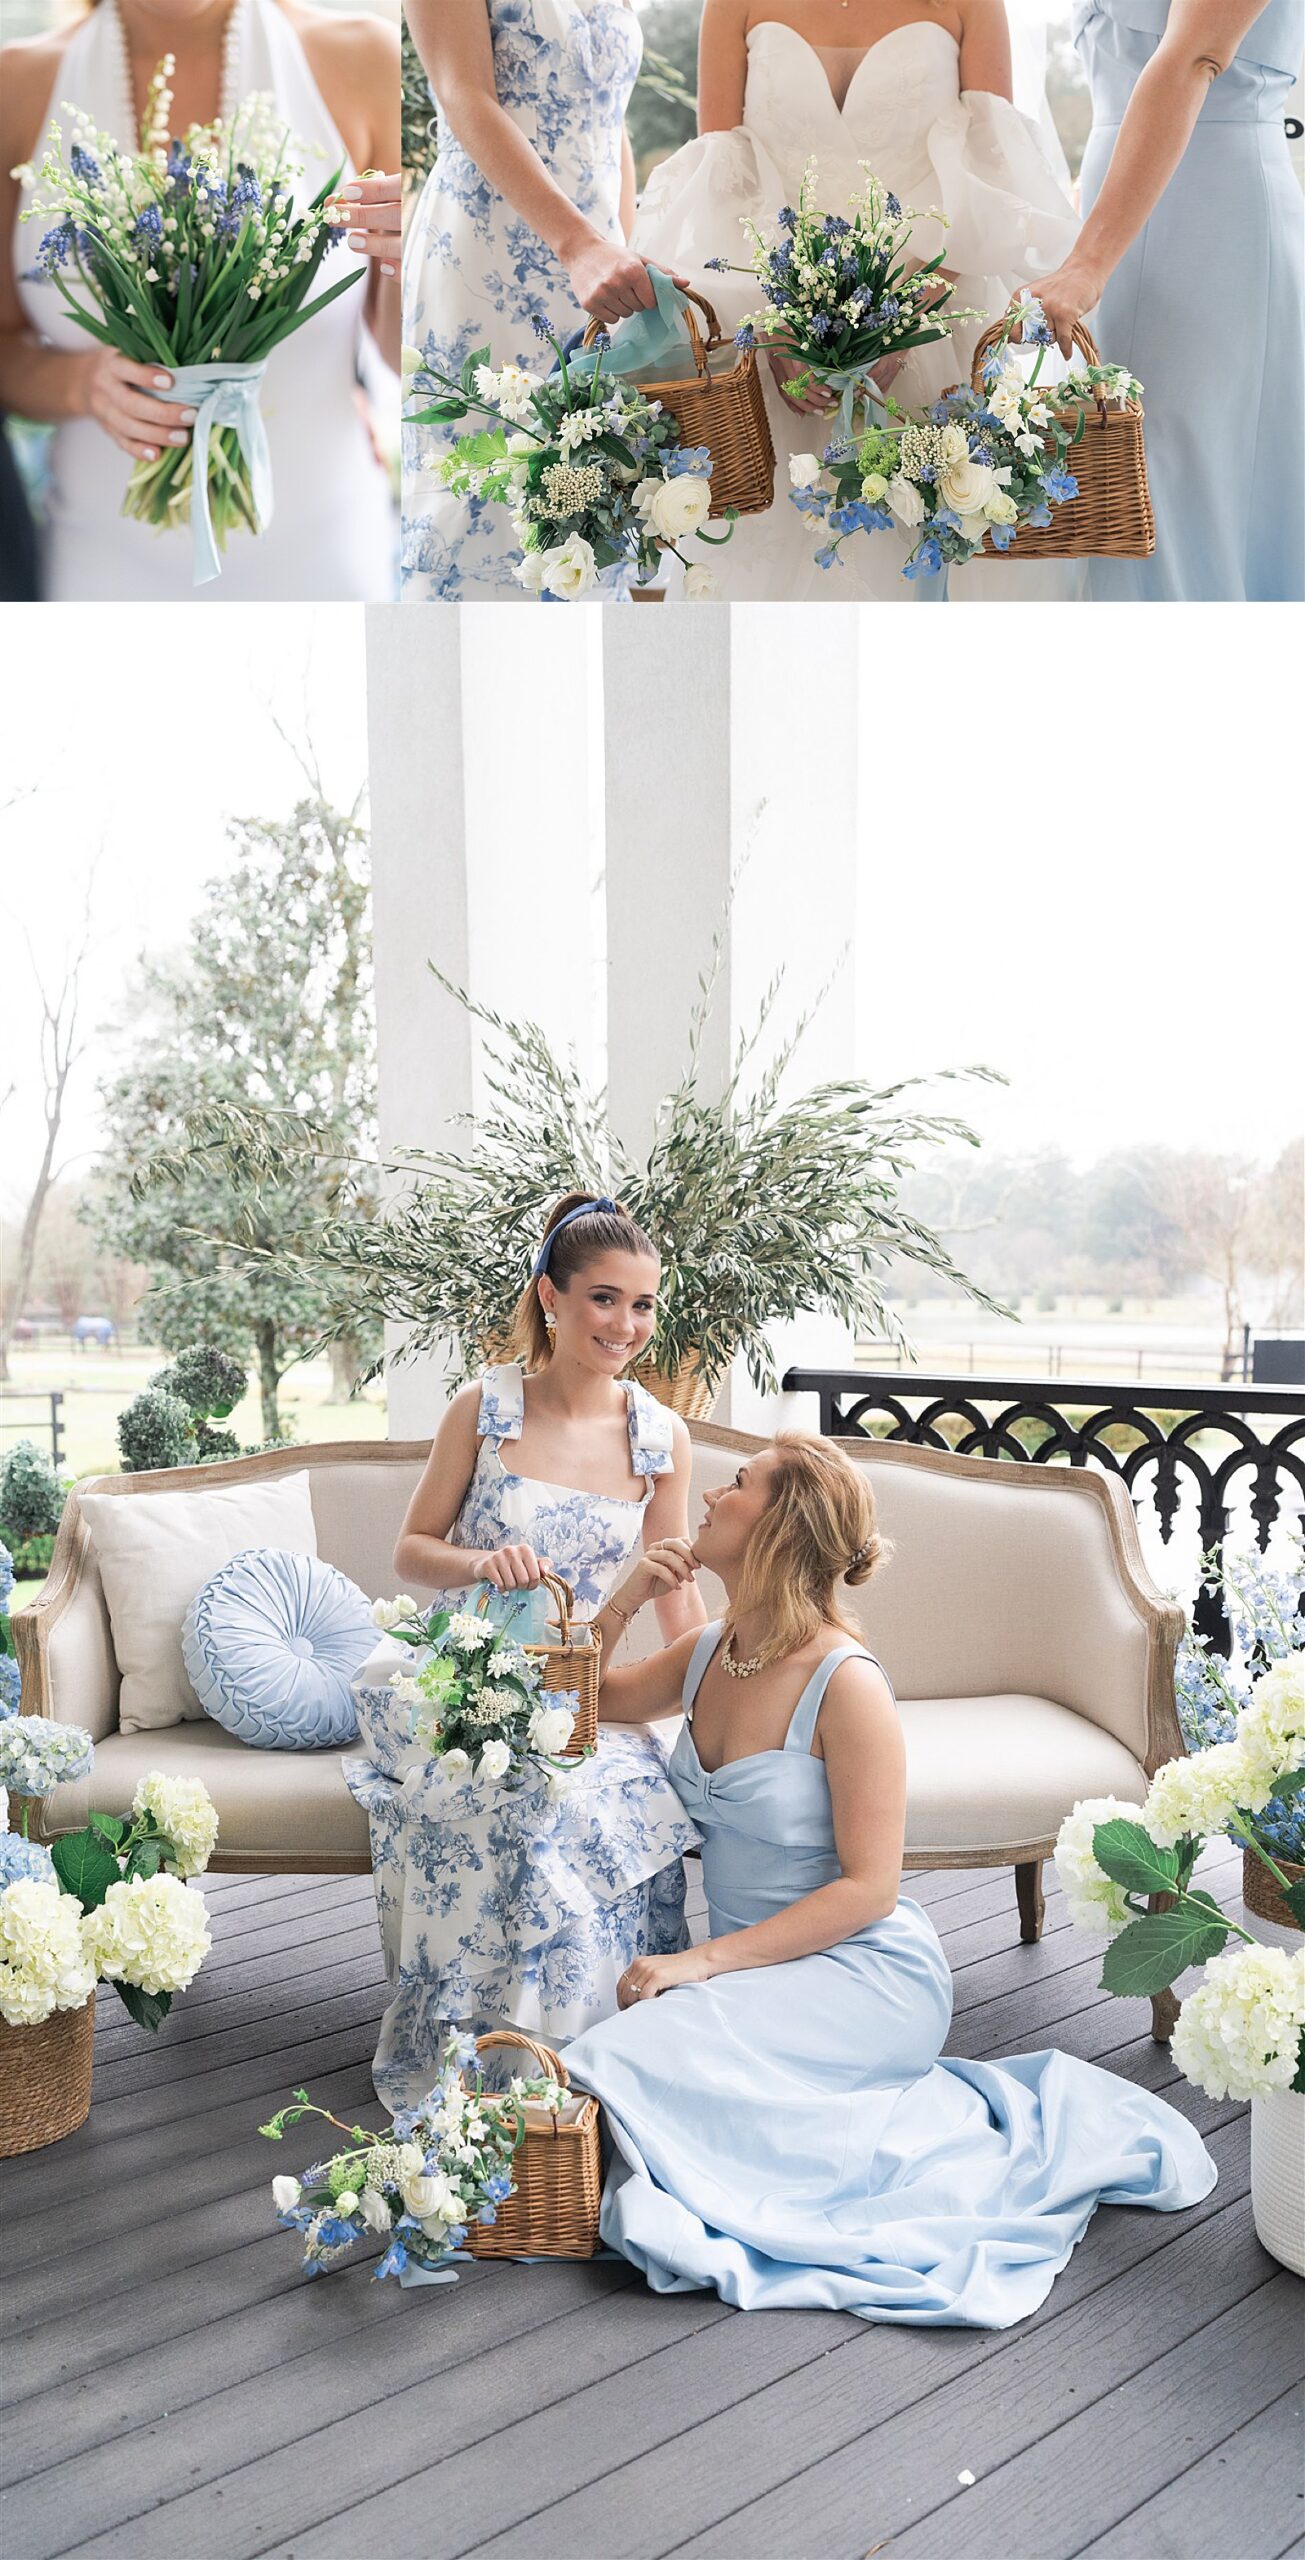 Women stand together holding floral arrangements by Houston’s Best Wedding Photographers